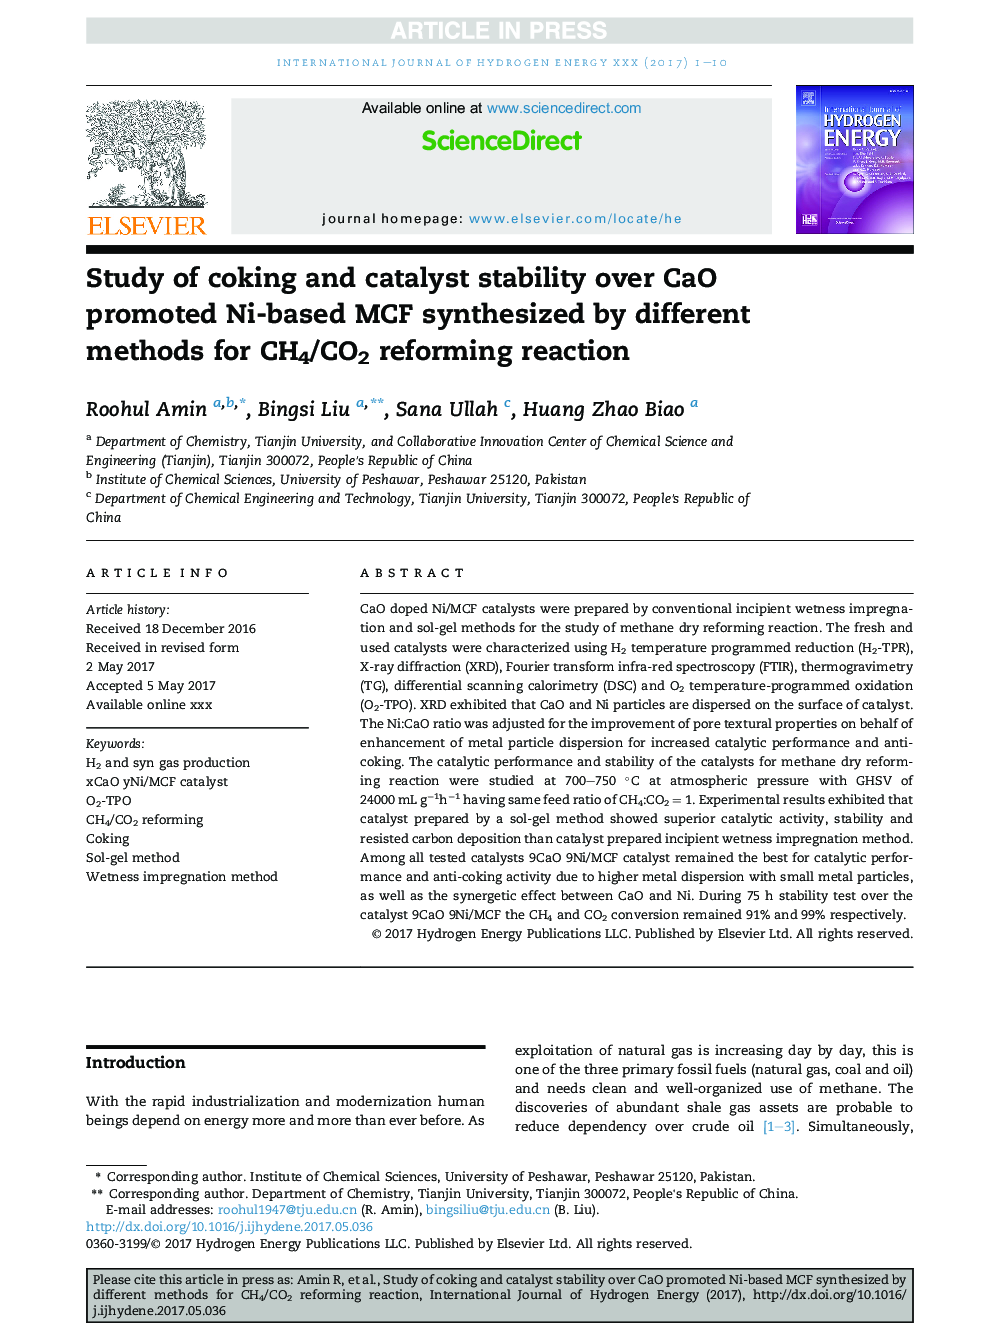 Study of coking and catalyst stability over CaO promoted Ni-based MCF synthesized by different methods for CH4/CO2 reforming reaction